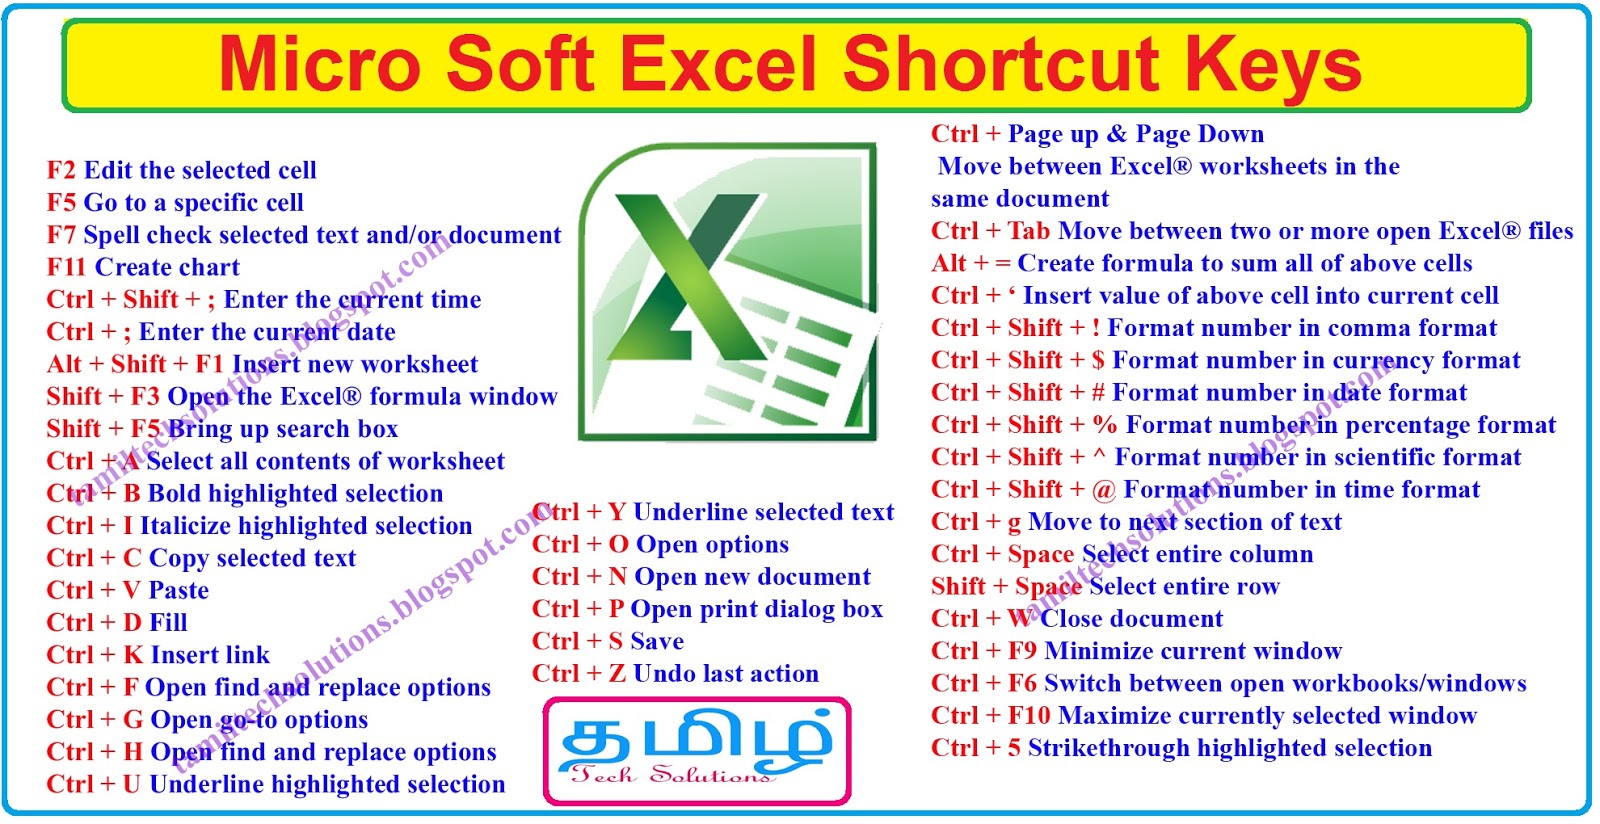 keyboard shortcuts for excel pdf